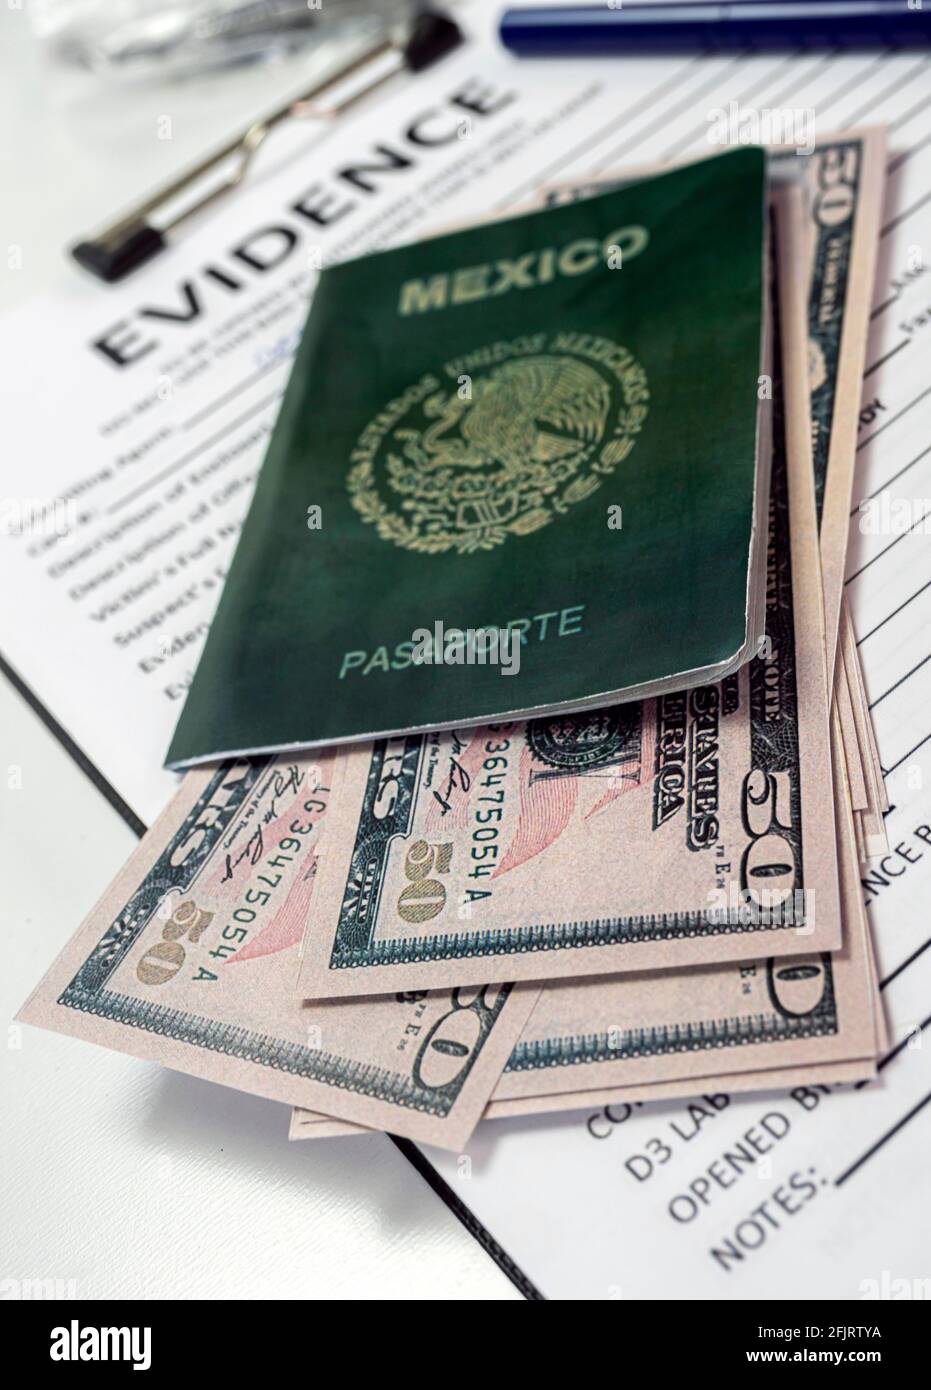 Some fifty-dollar notes in a Mexican passport in a crime lab, concept image Stock Photo